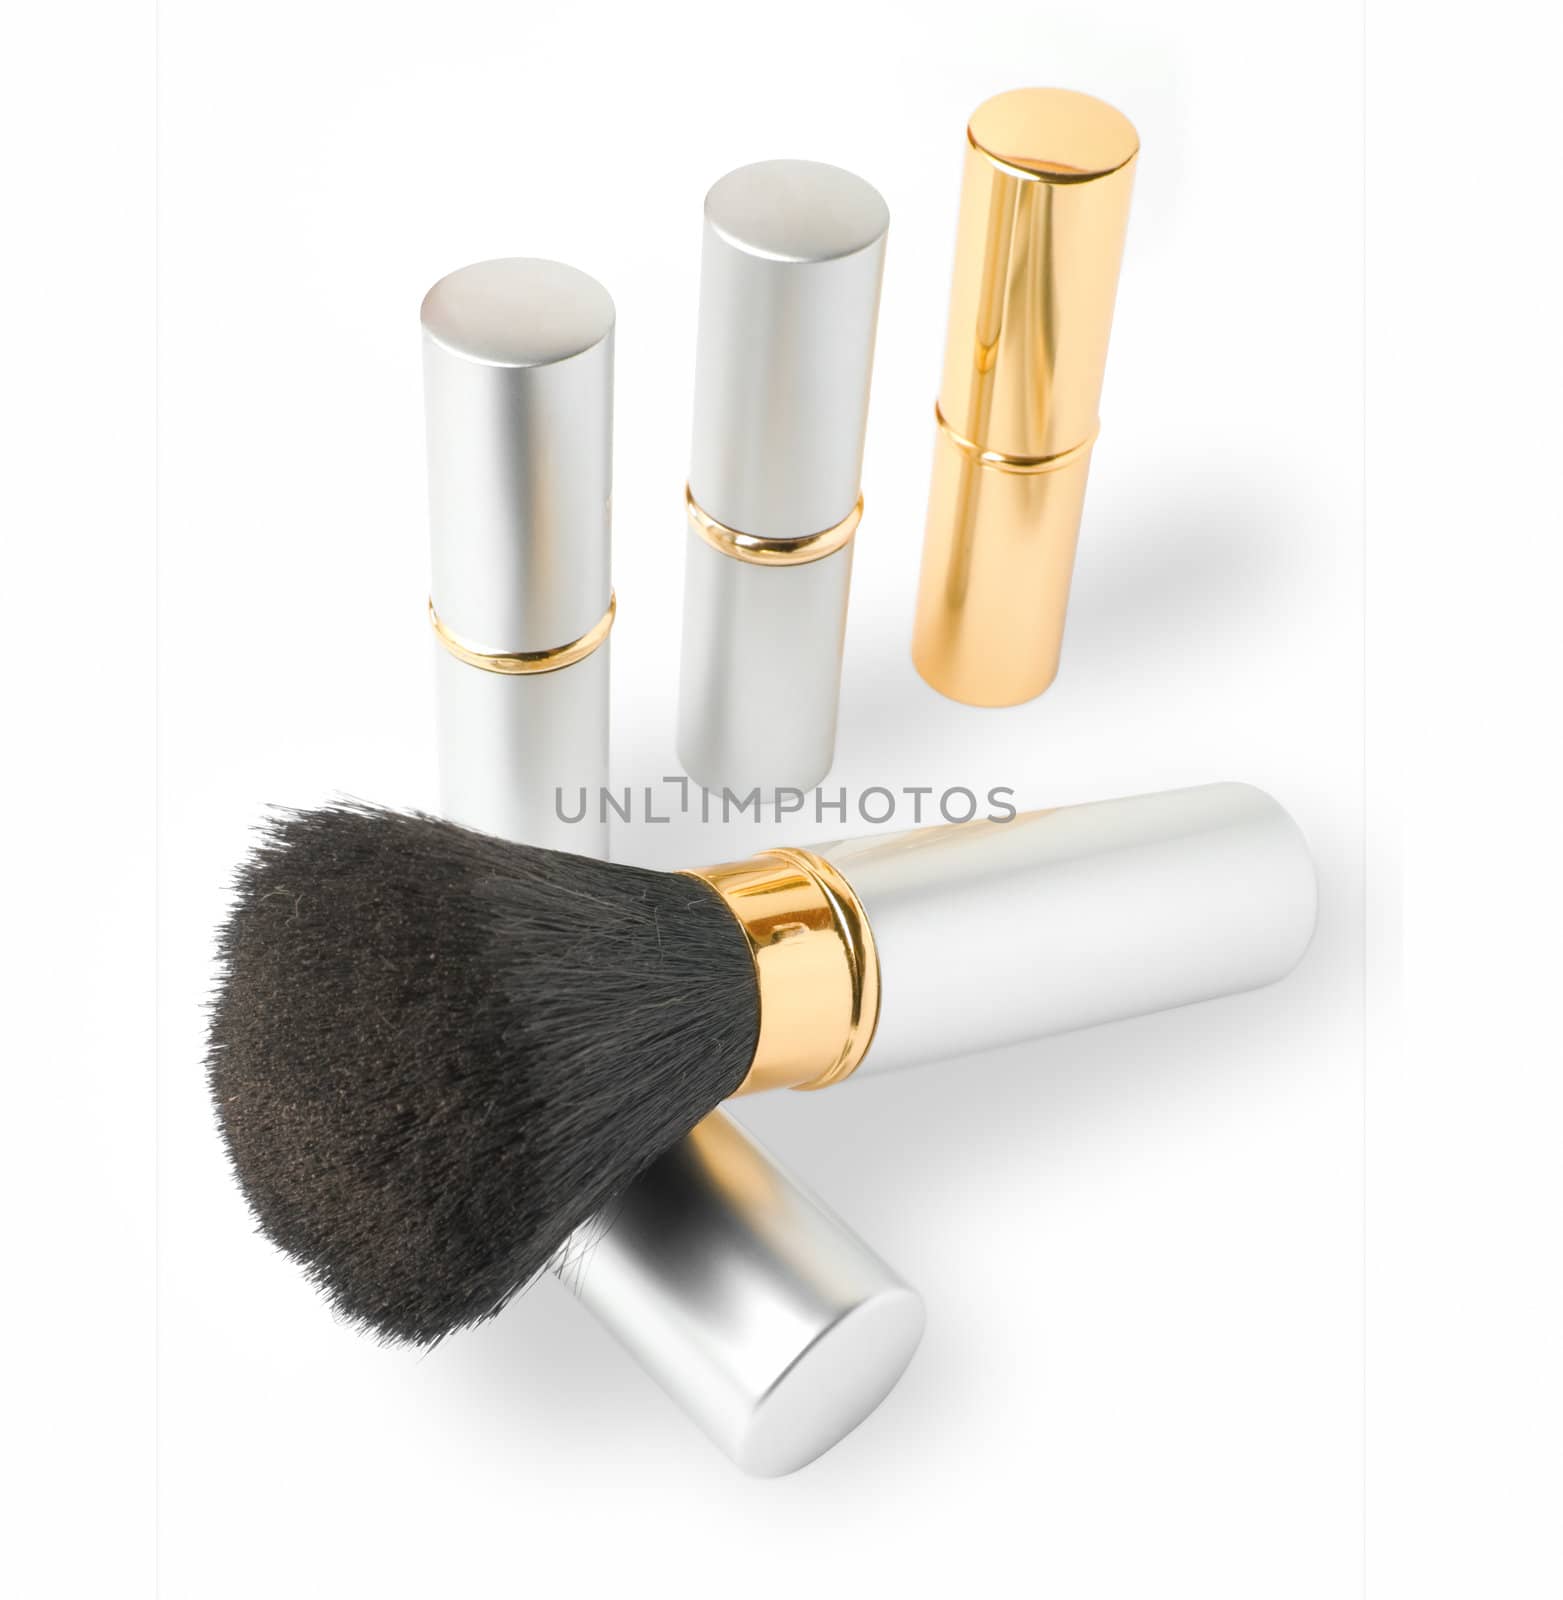 Golden and silver cosmetics set of brush and lipsticks.